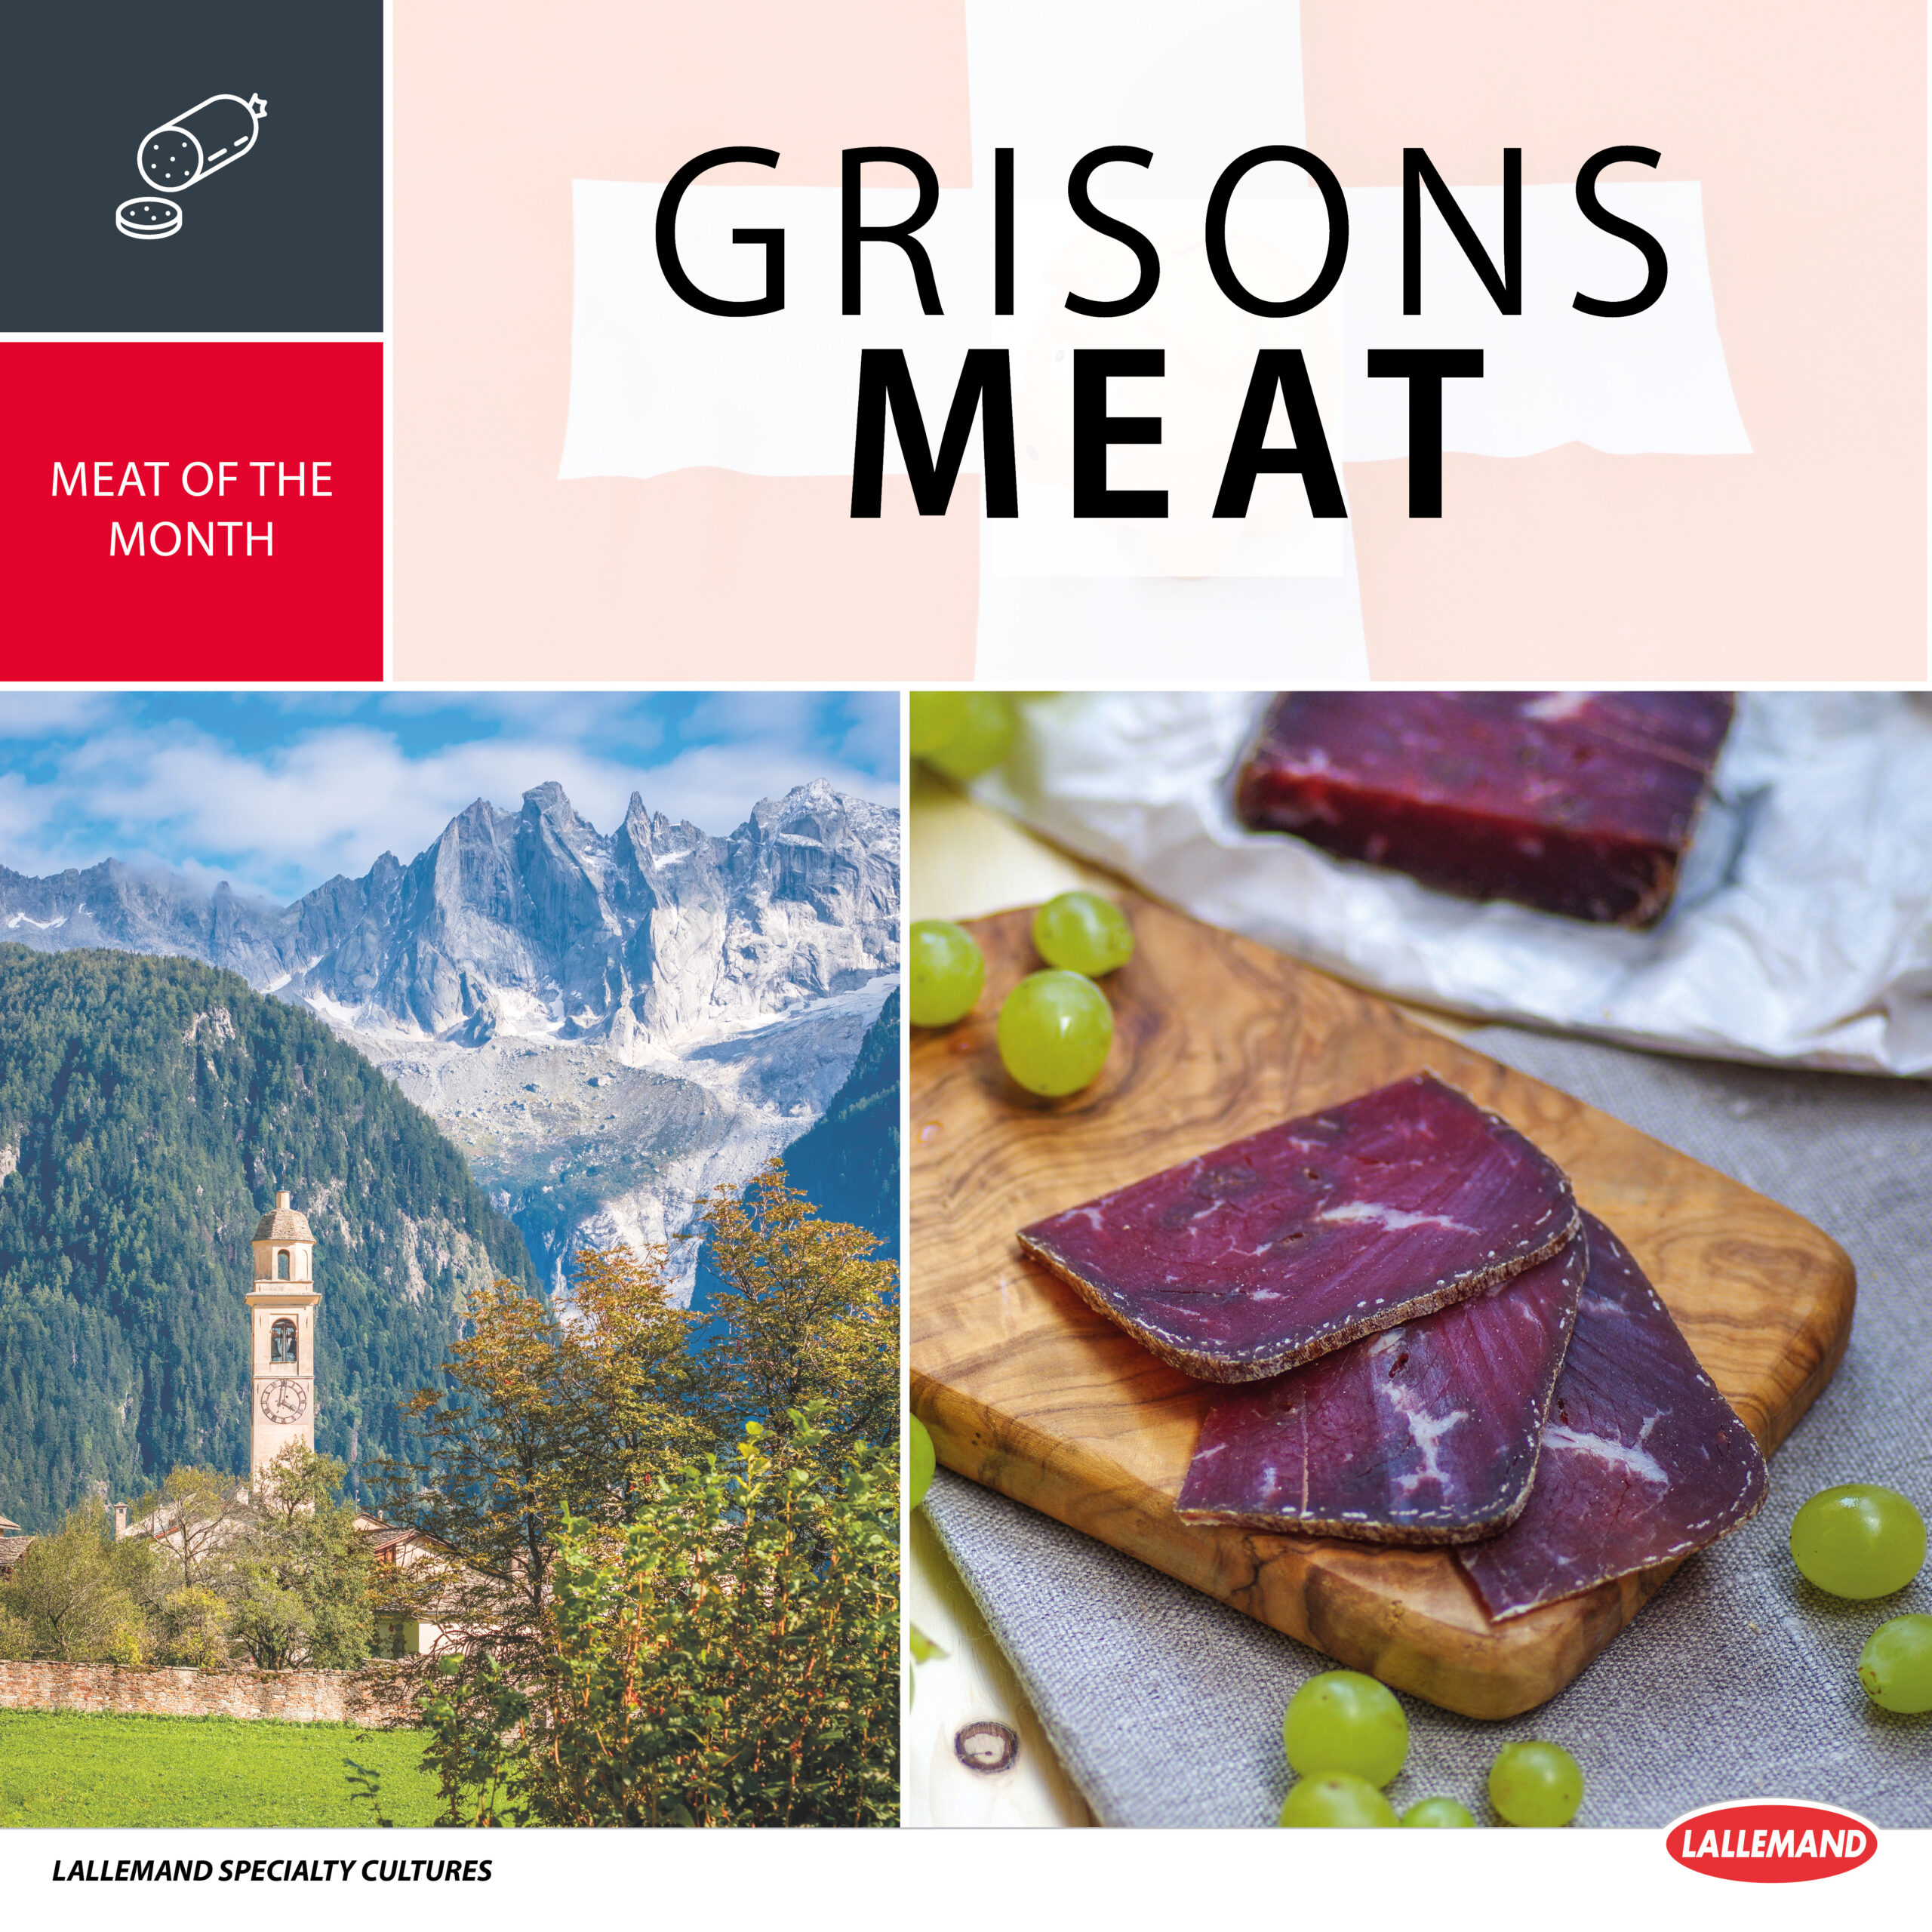 Get to know the Grisons Meat